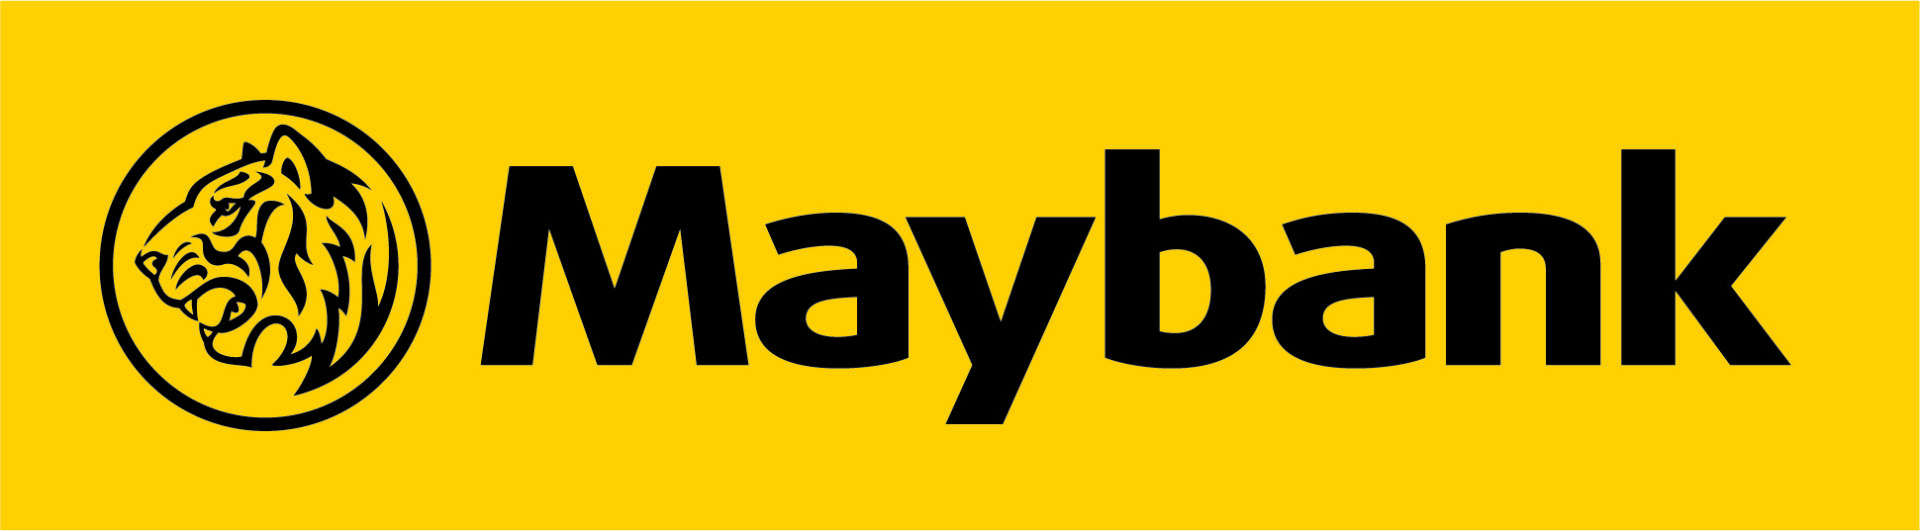 Logo of Maybank, the bank that exclusively distributes the retirement fund